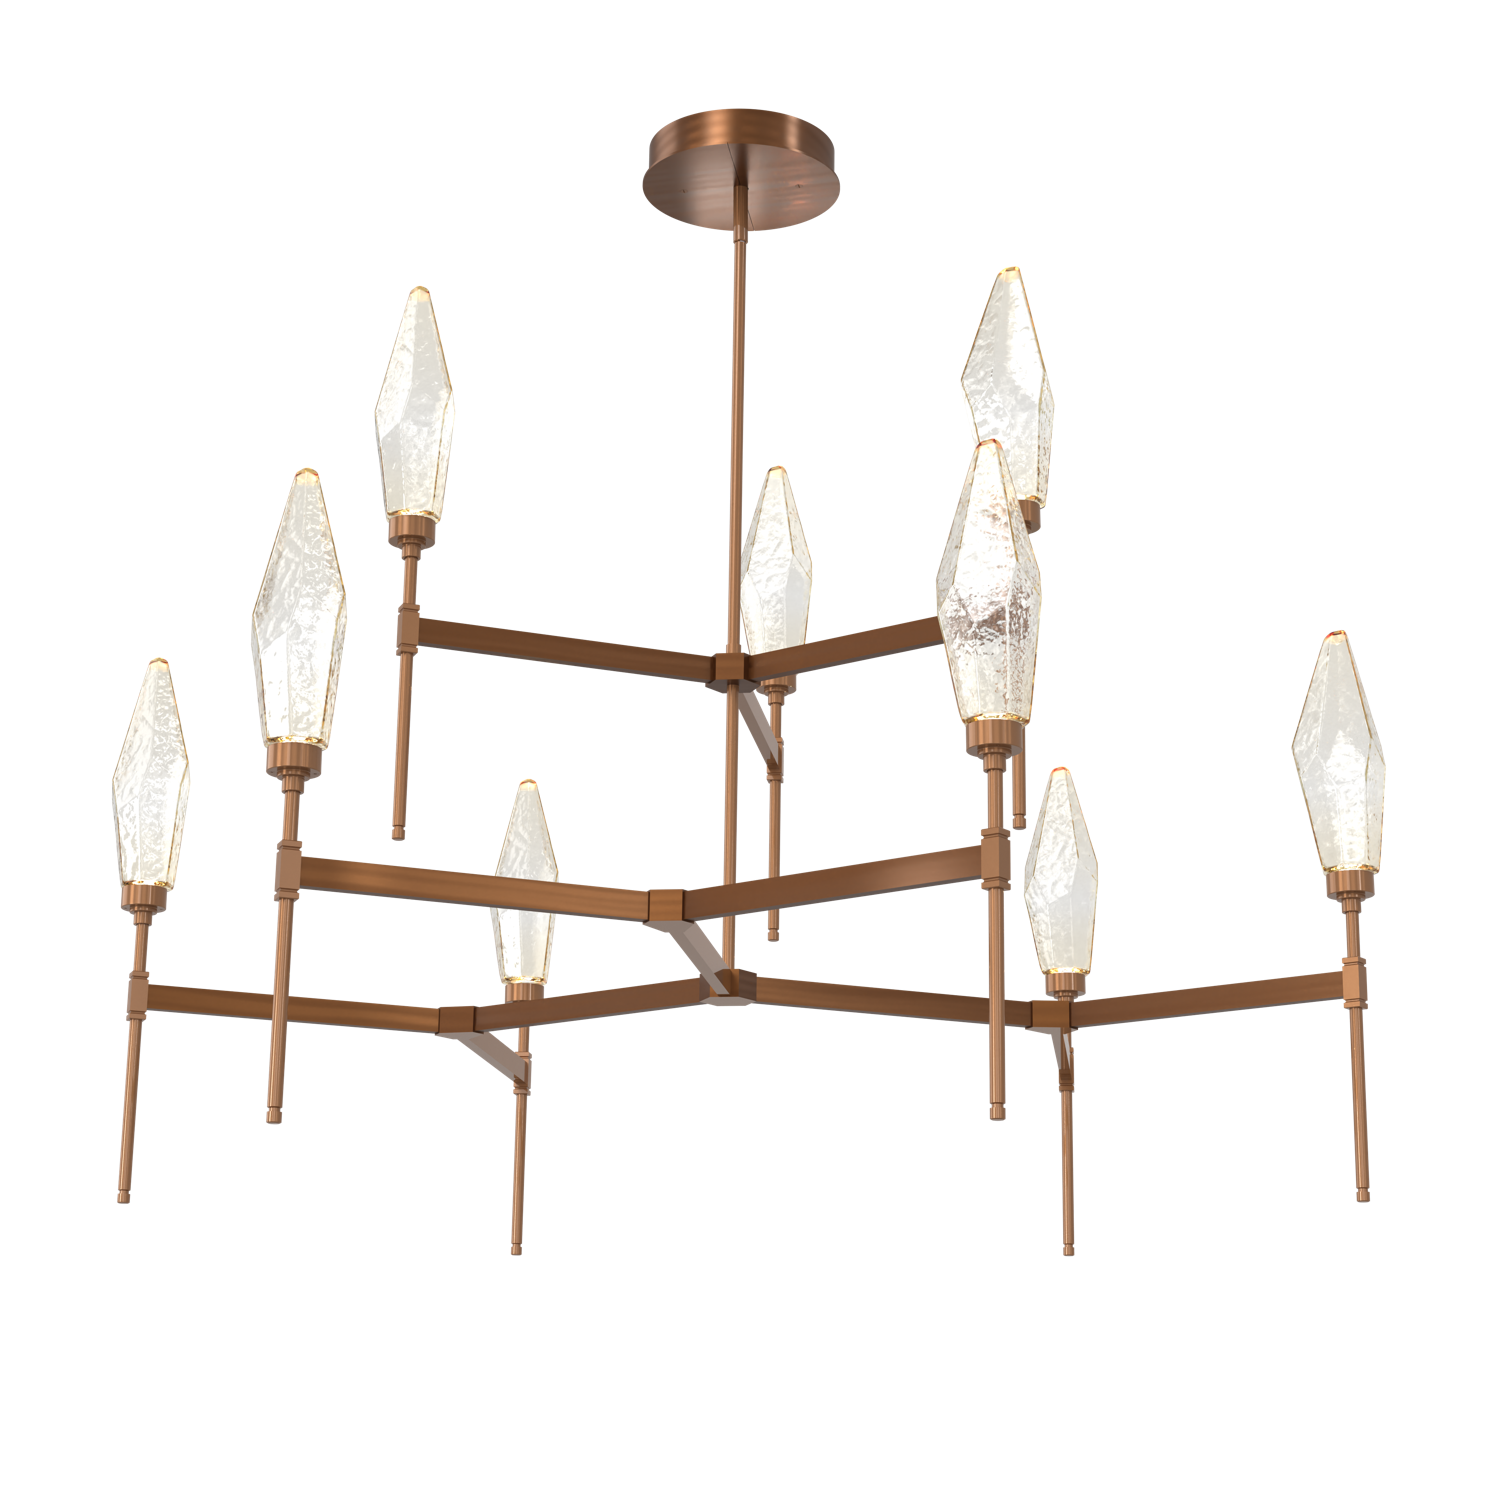 CHB0050-54-RB-CA-Hammerton-Studio-Rock-Crystal-54-inch-round-two-tier-belvedere-chandelier-with-oil-rubbed-bronze-finish-and-chilled-amber-blown-glass-shades-and-LED-lamping